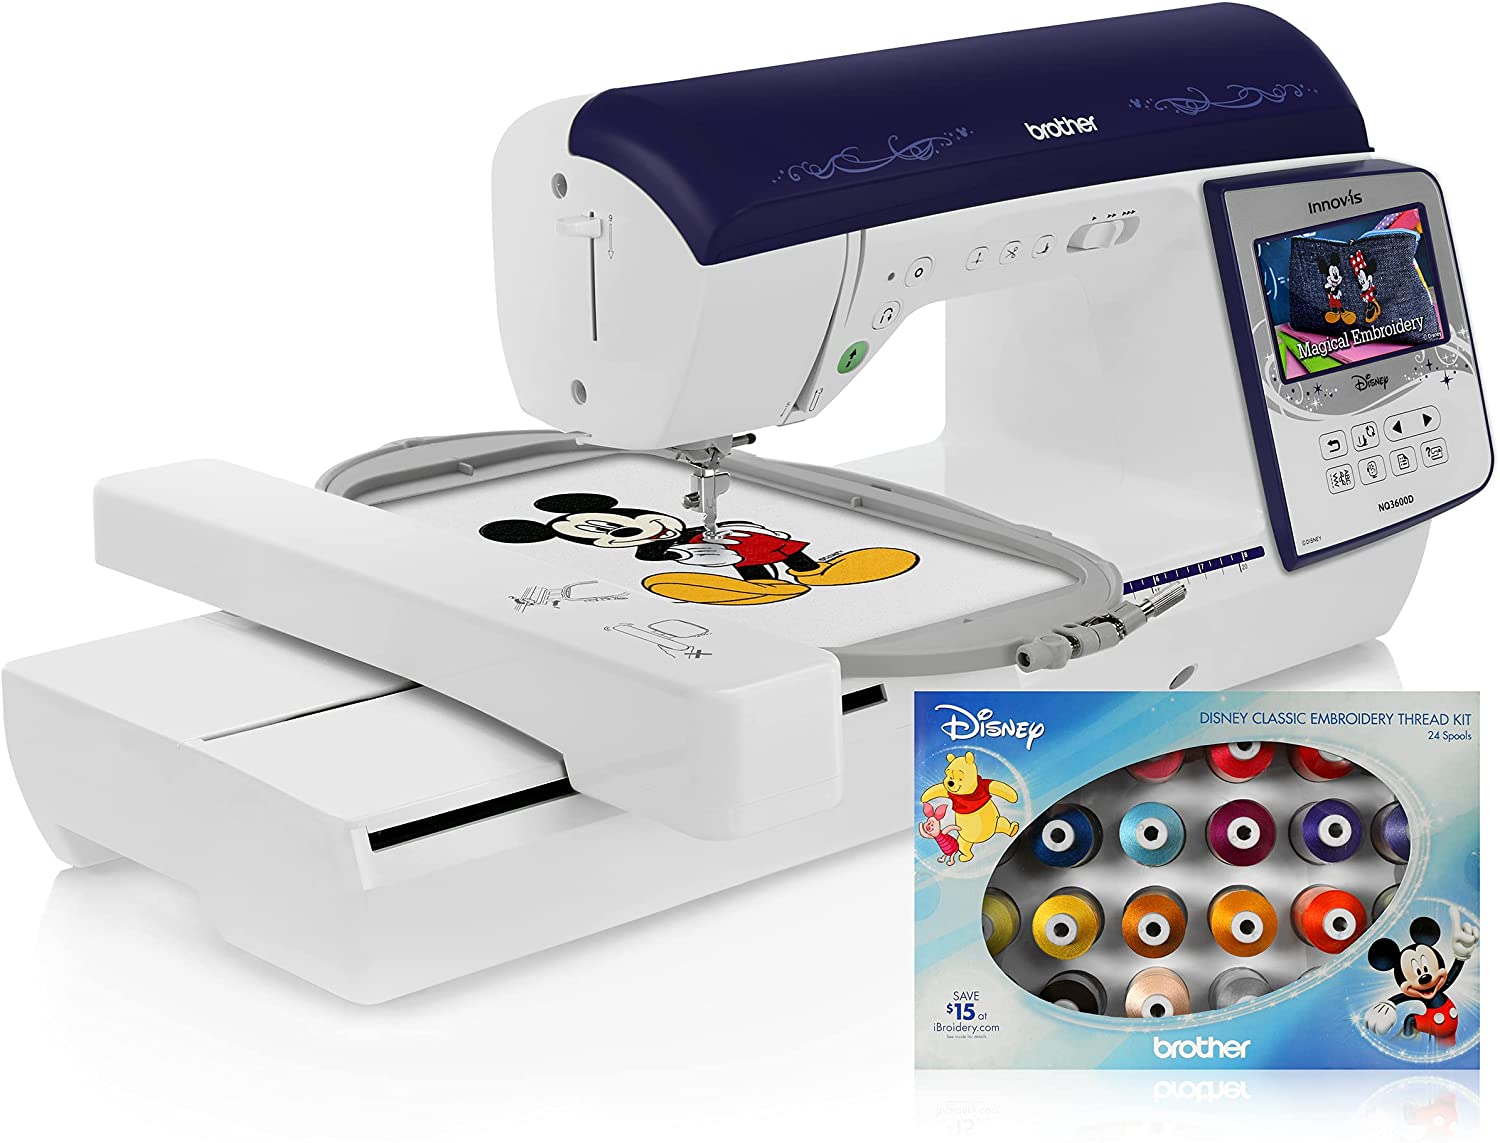 brother innov is nq3600d mbroidery and sewing machine with disney embroidery thread kit bundle